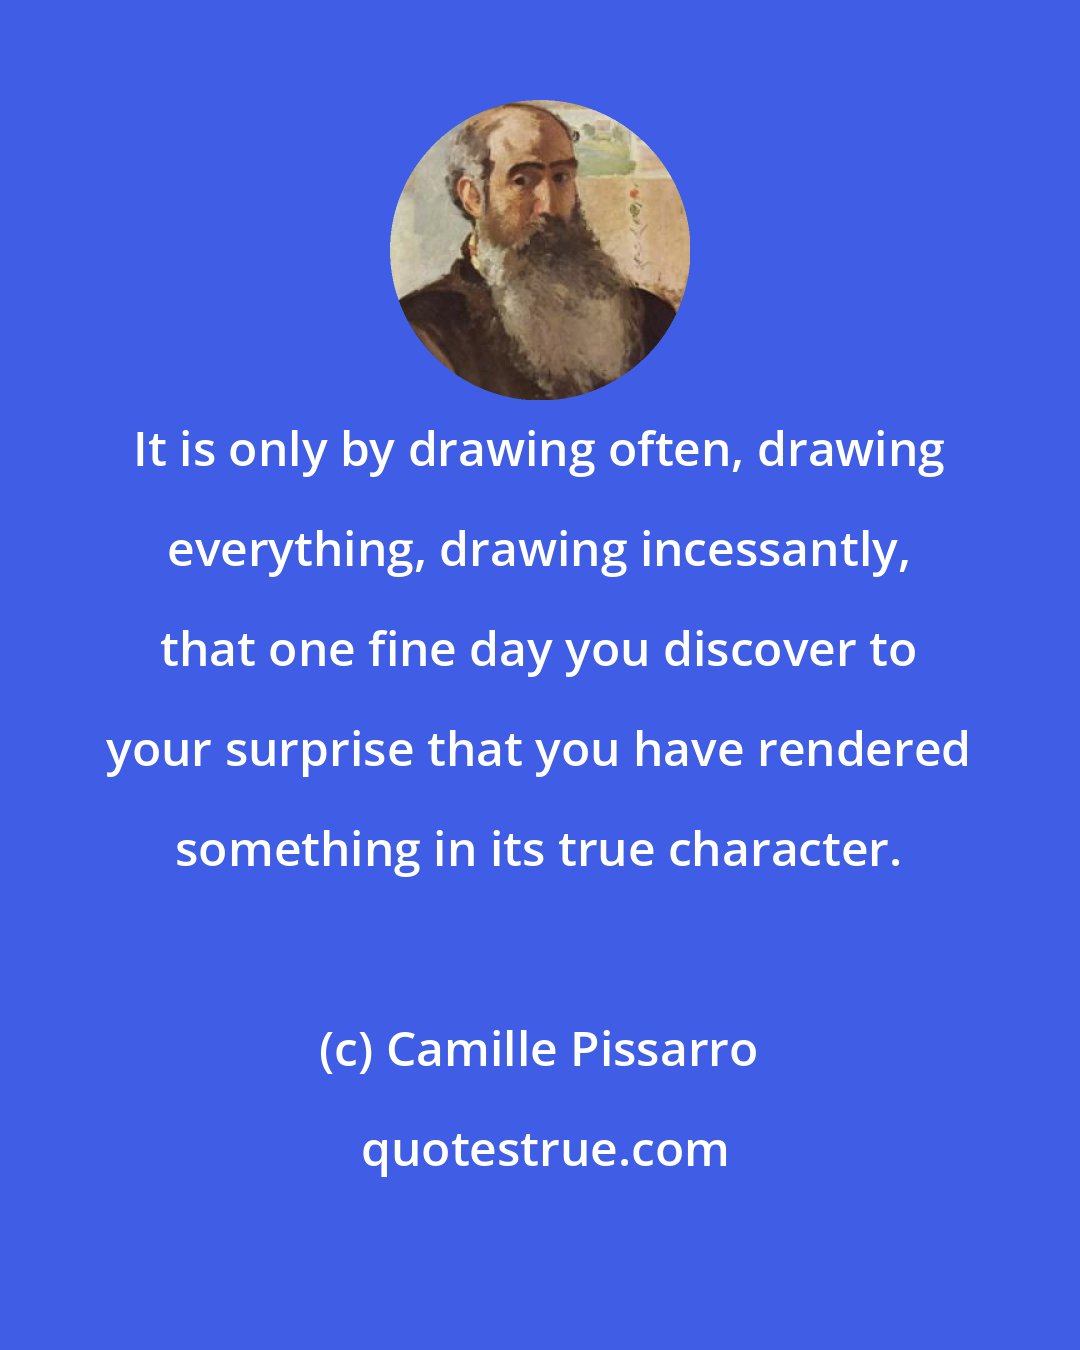 Camille Pissarro: It is only by drawing often, drawing everything, drawing incessantly, that one fine day you discover to your surprise that you have rendered something in its true character.